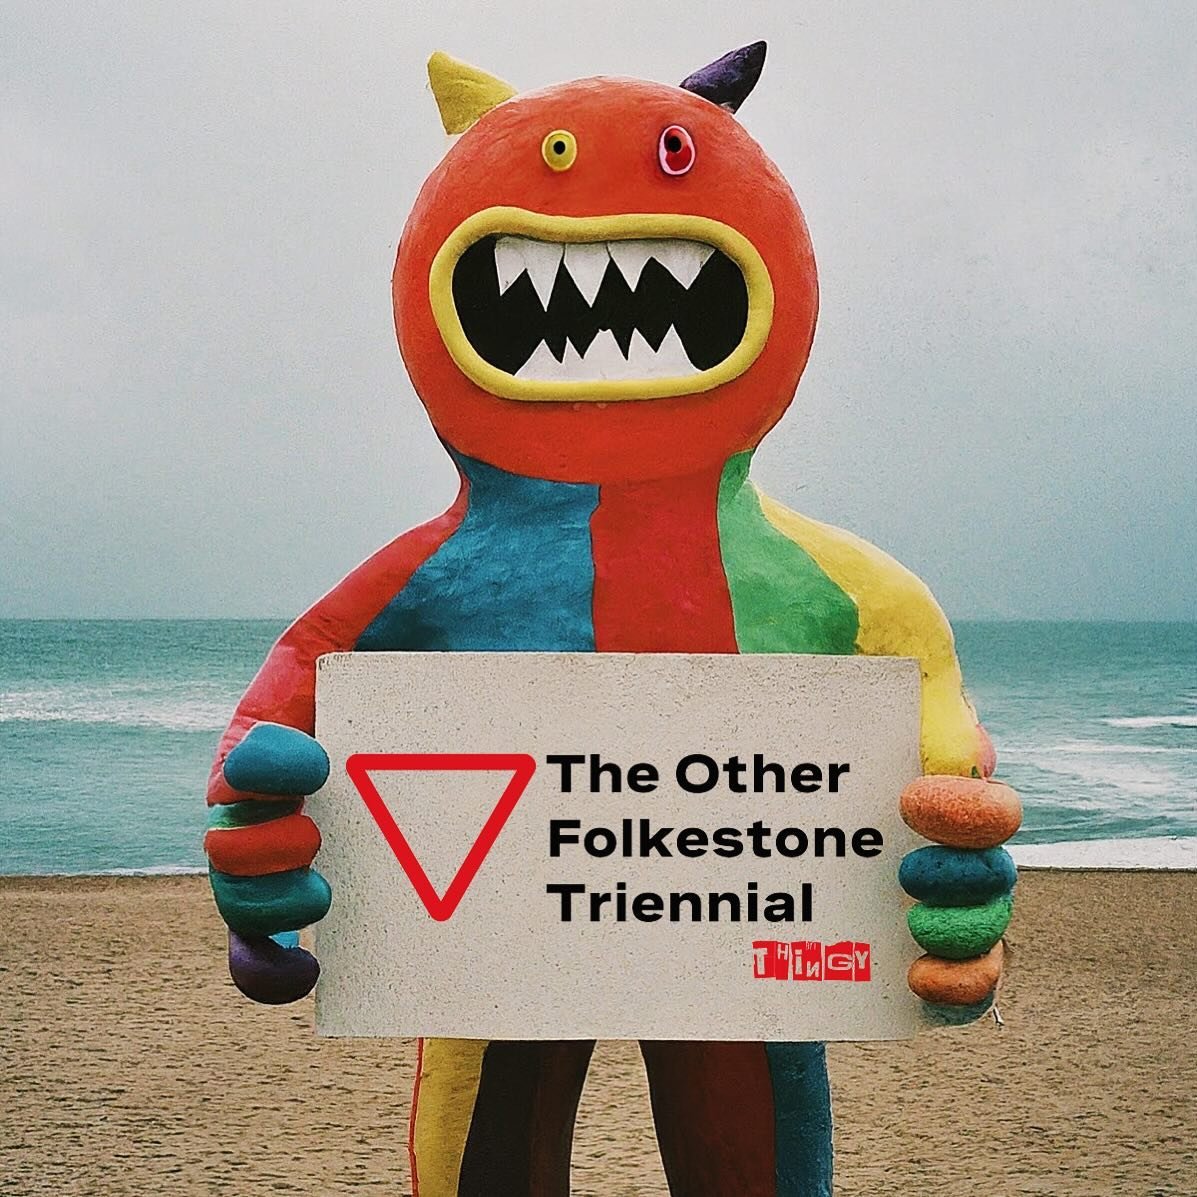 Good Morning! 

#theotherfolkestonetriennial is on the loose in the widest, weirdest and most colourful possible connotations known to humankind. It appears ideas, conversations and rumours are already running amuck so I think it&rsquo;s about time w